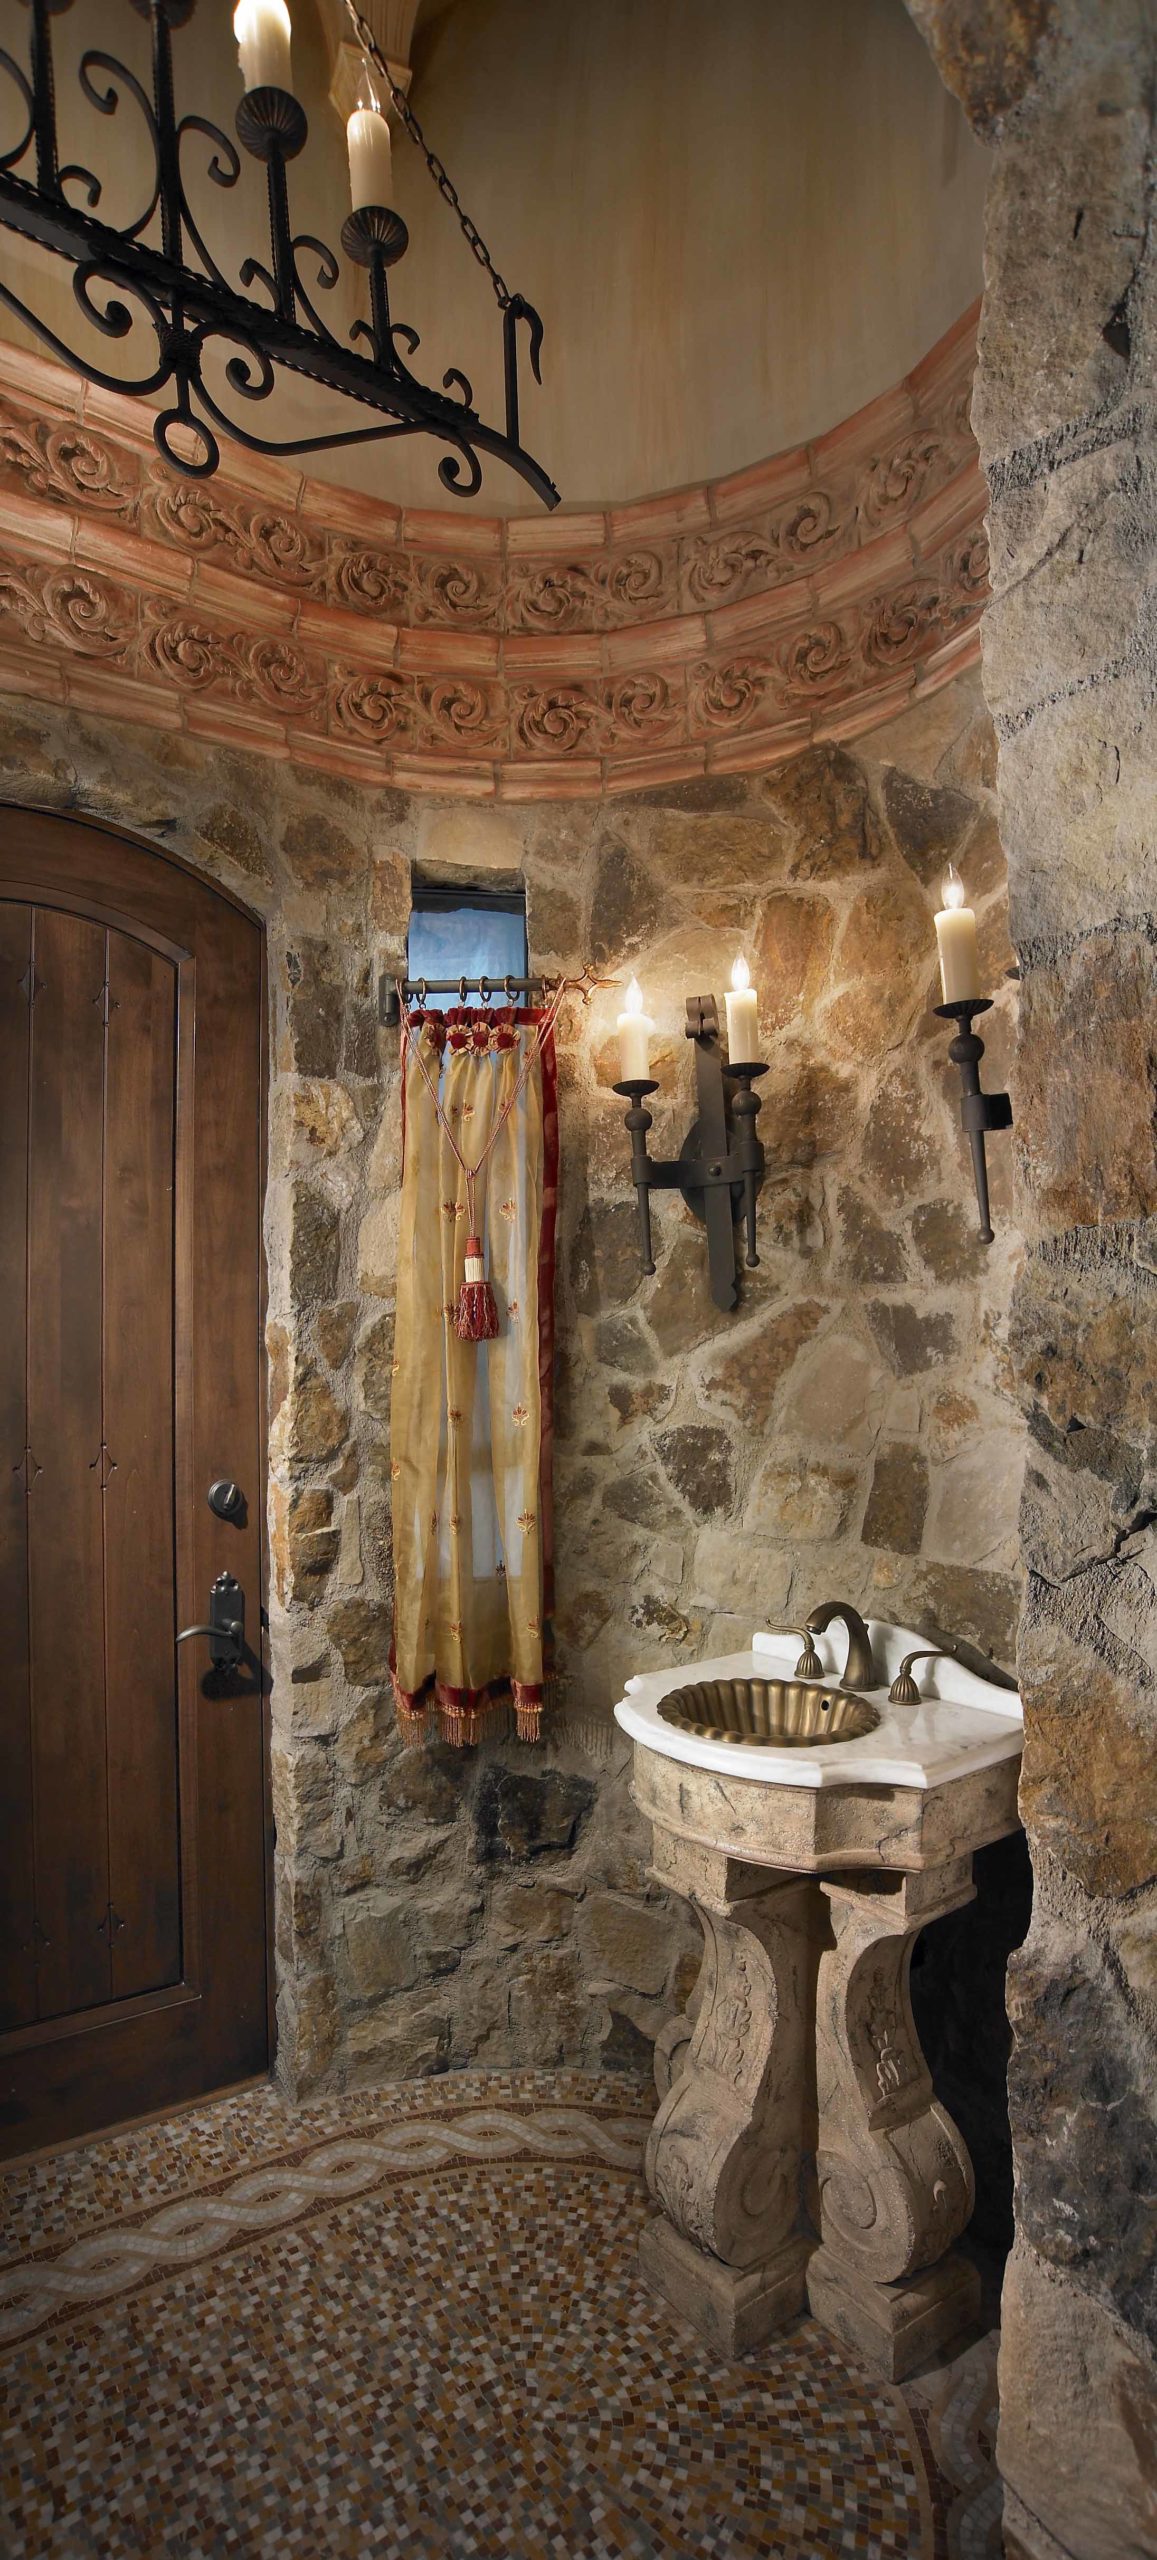 Sink against a stone wall with candles hanging above it